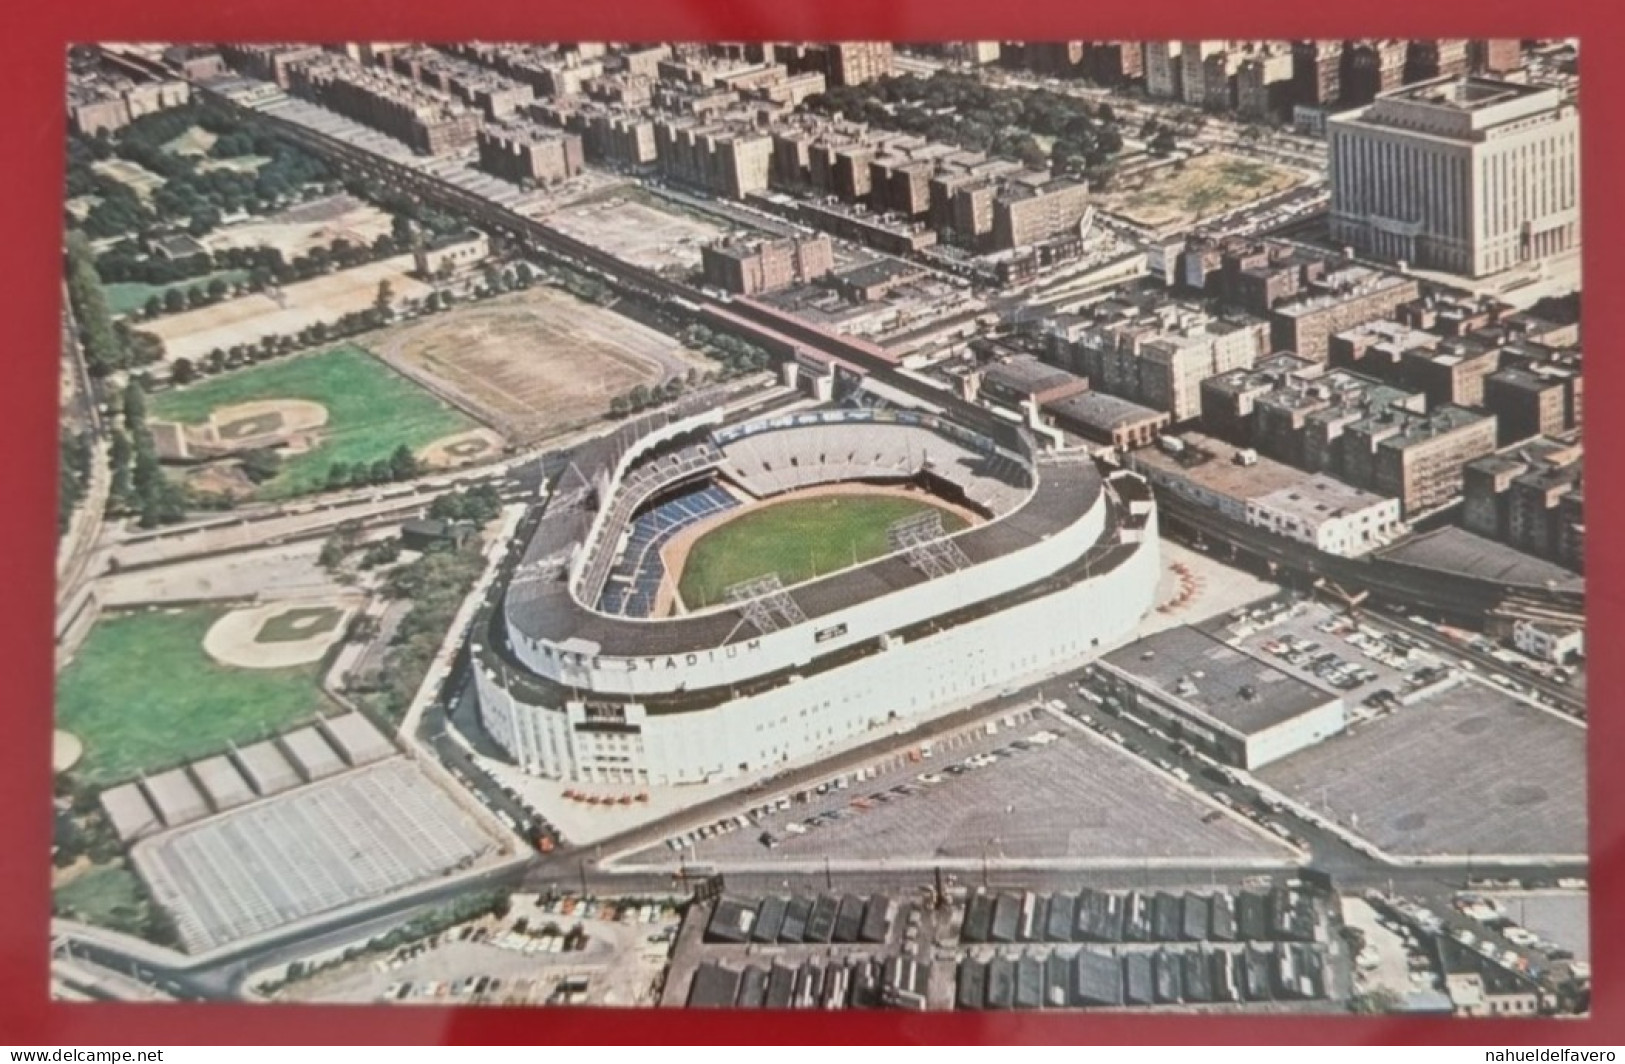 Uncirculated Postcard - USA - NY, NEW YORK CITY - AIR VIEW OF YANKEE STADIUM - Stadiums & Sporting Infrastructures